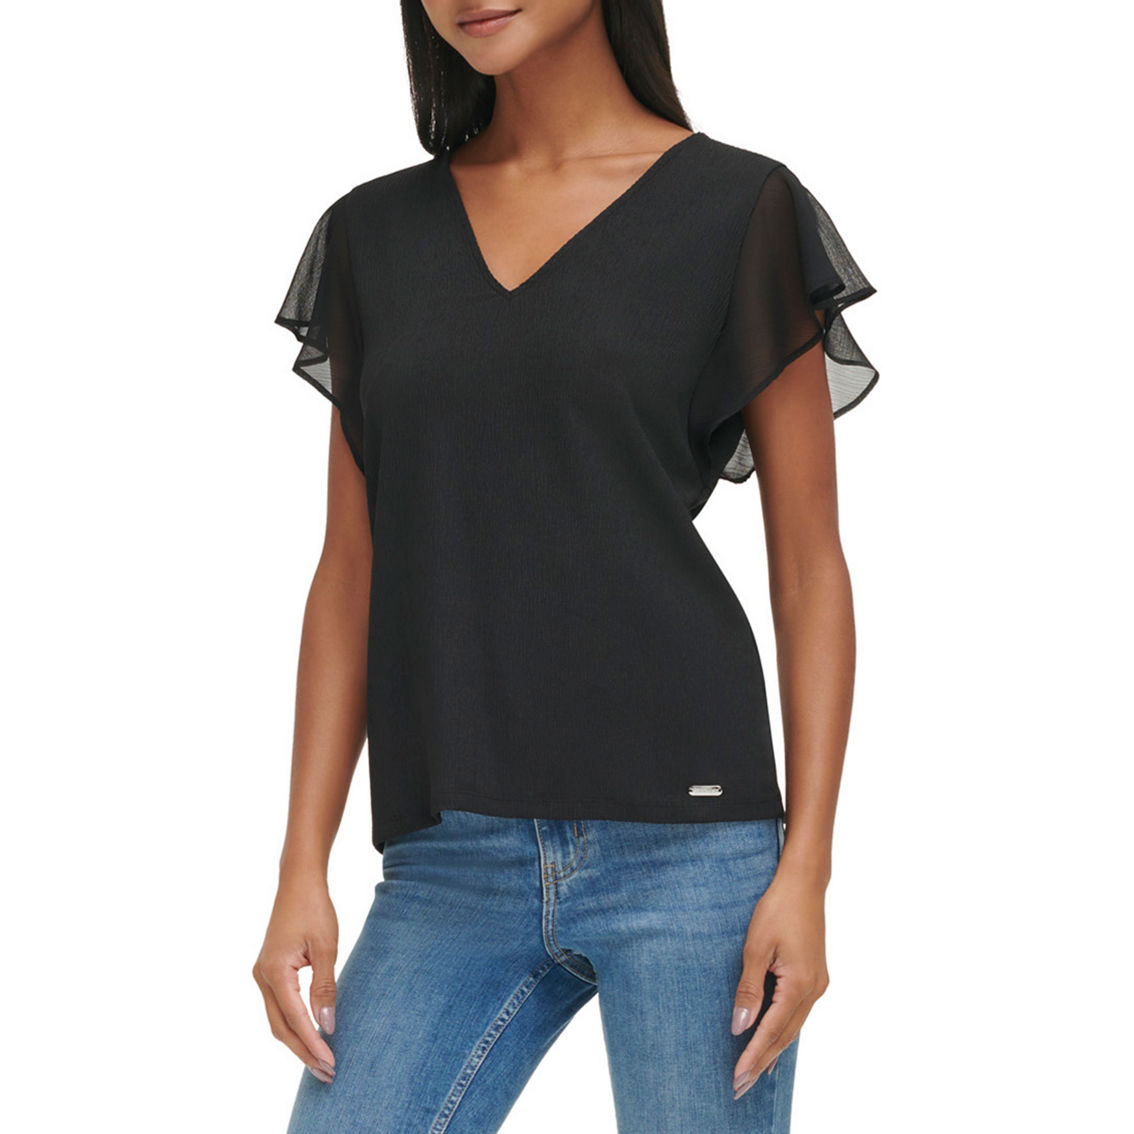 Calvin Klein Textured Knit Chiffon Sleeve V-Neck Top - Image 4 of 4